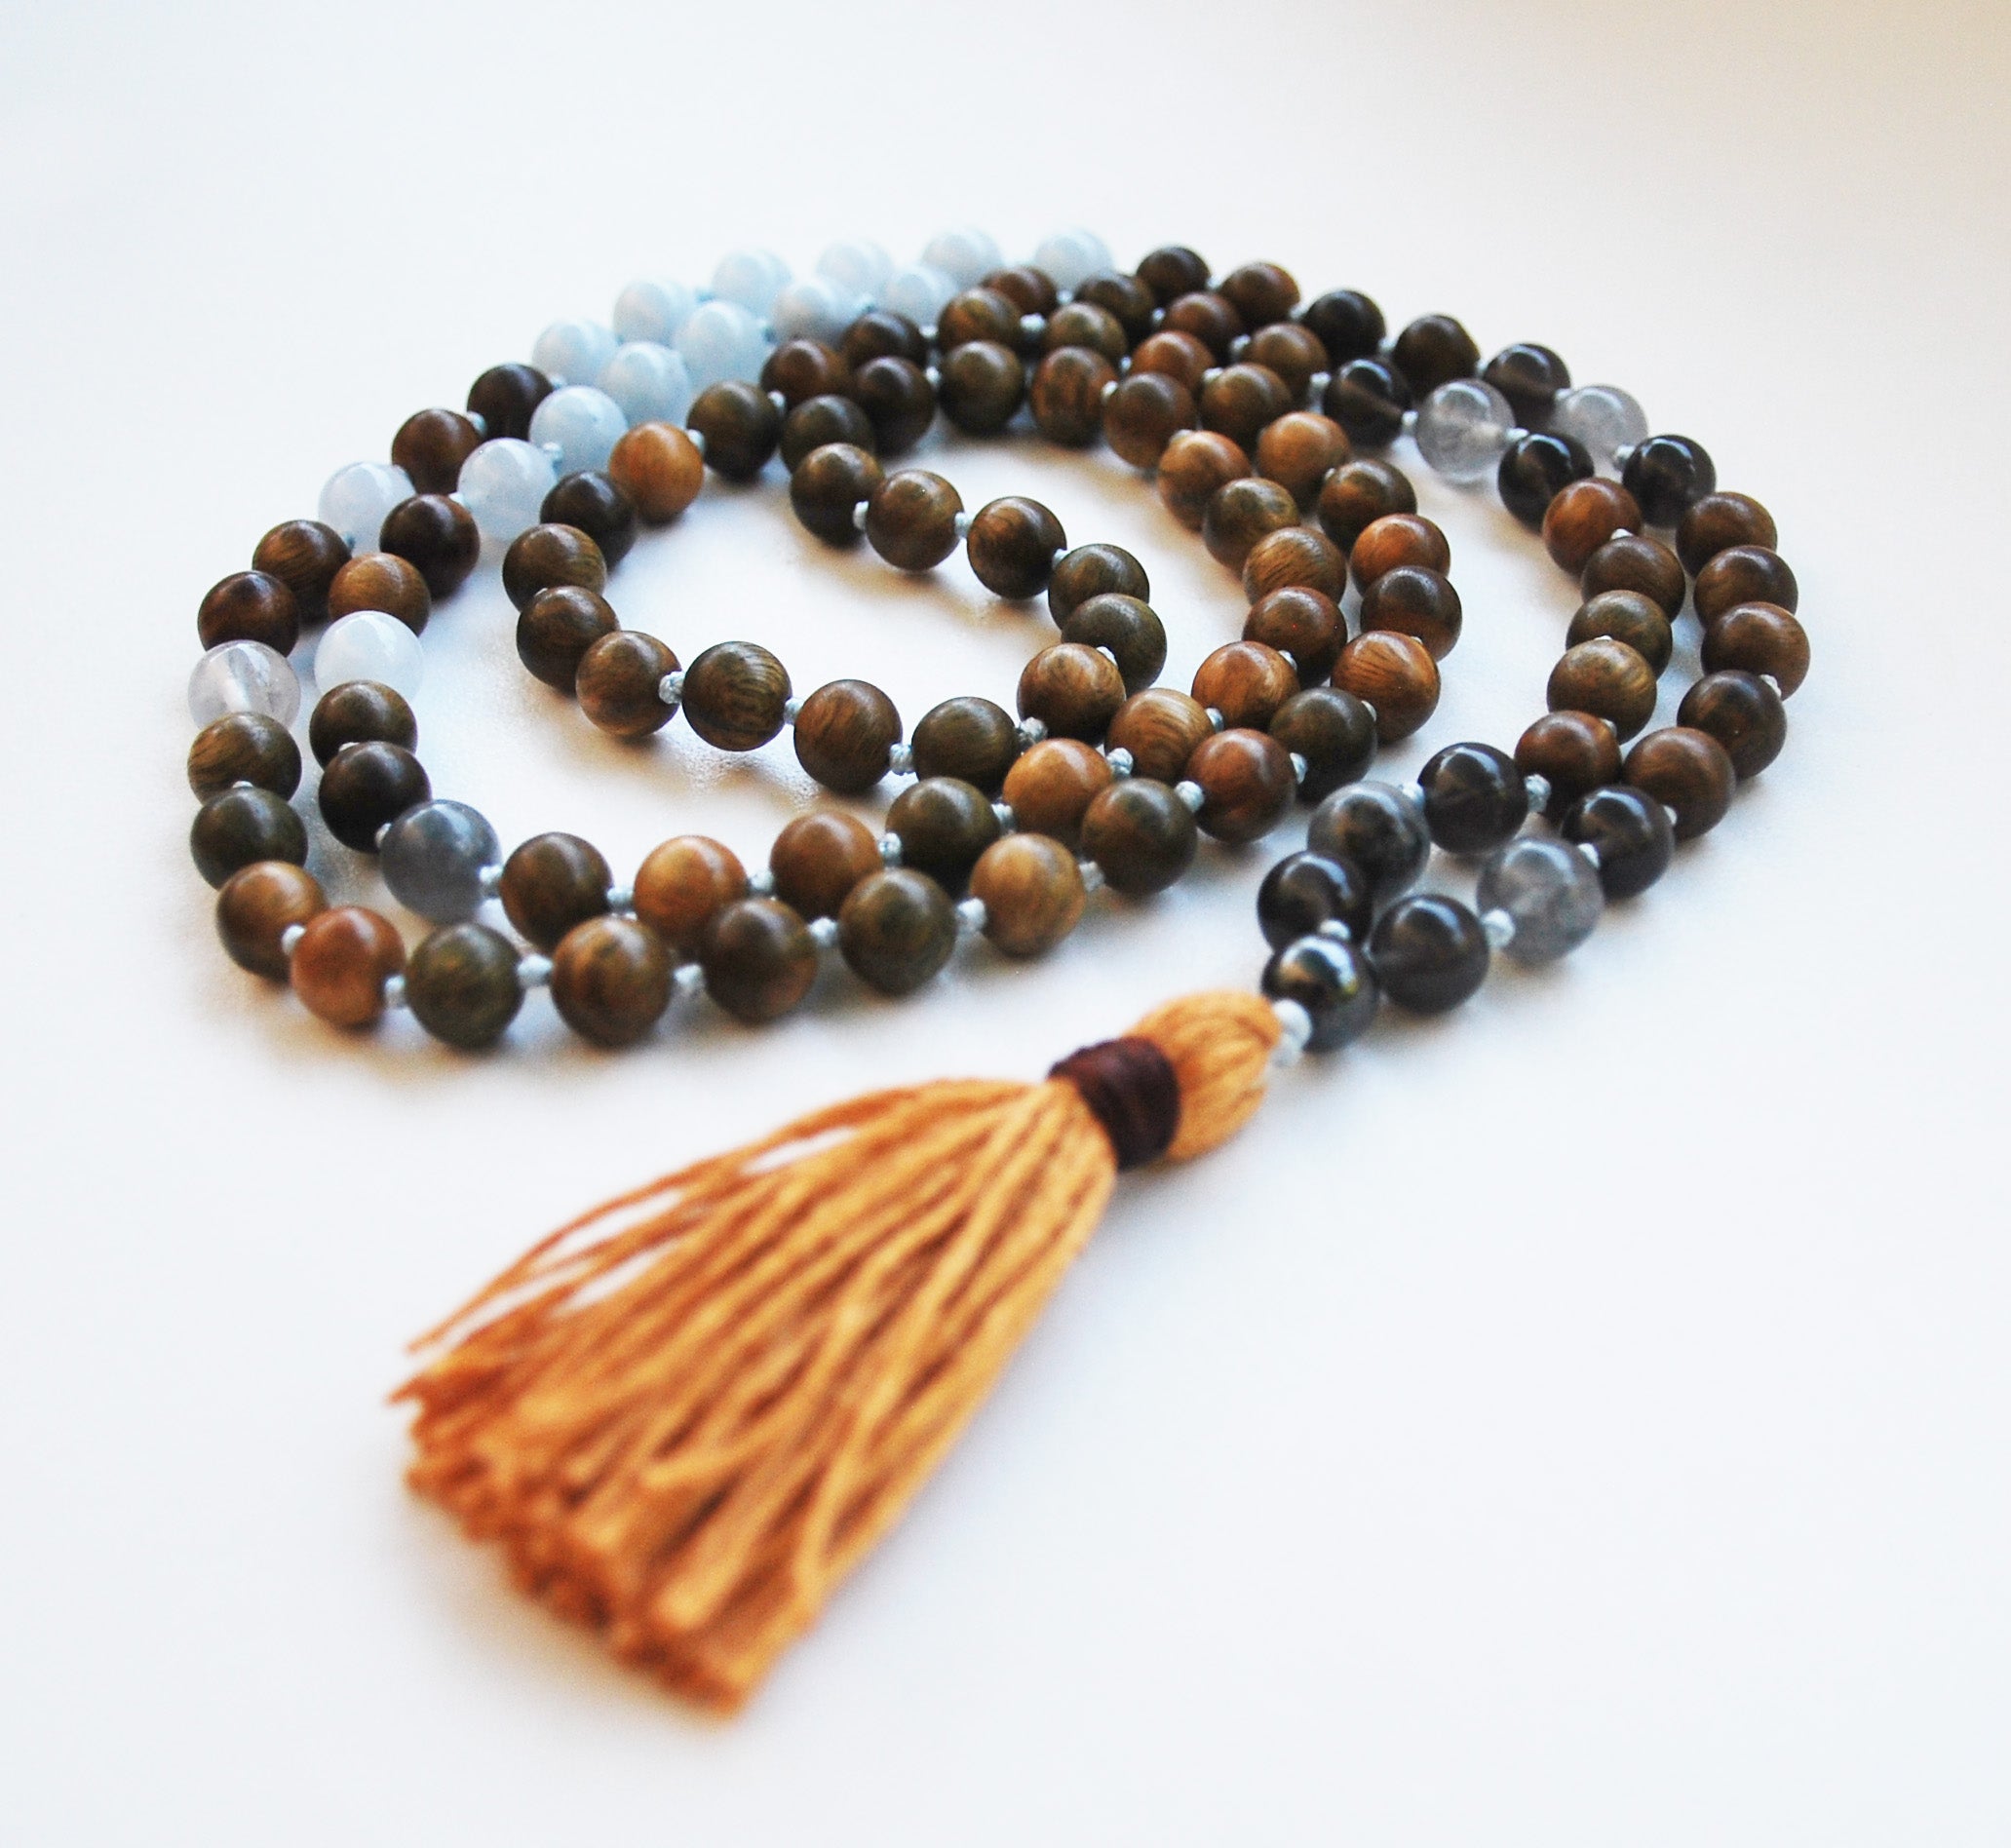 8mm Green Sandalwood & Aquamarine 108 Knotted Mala Necklace with Cotton Tassel